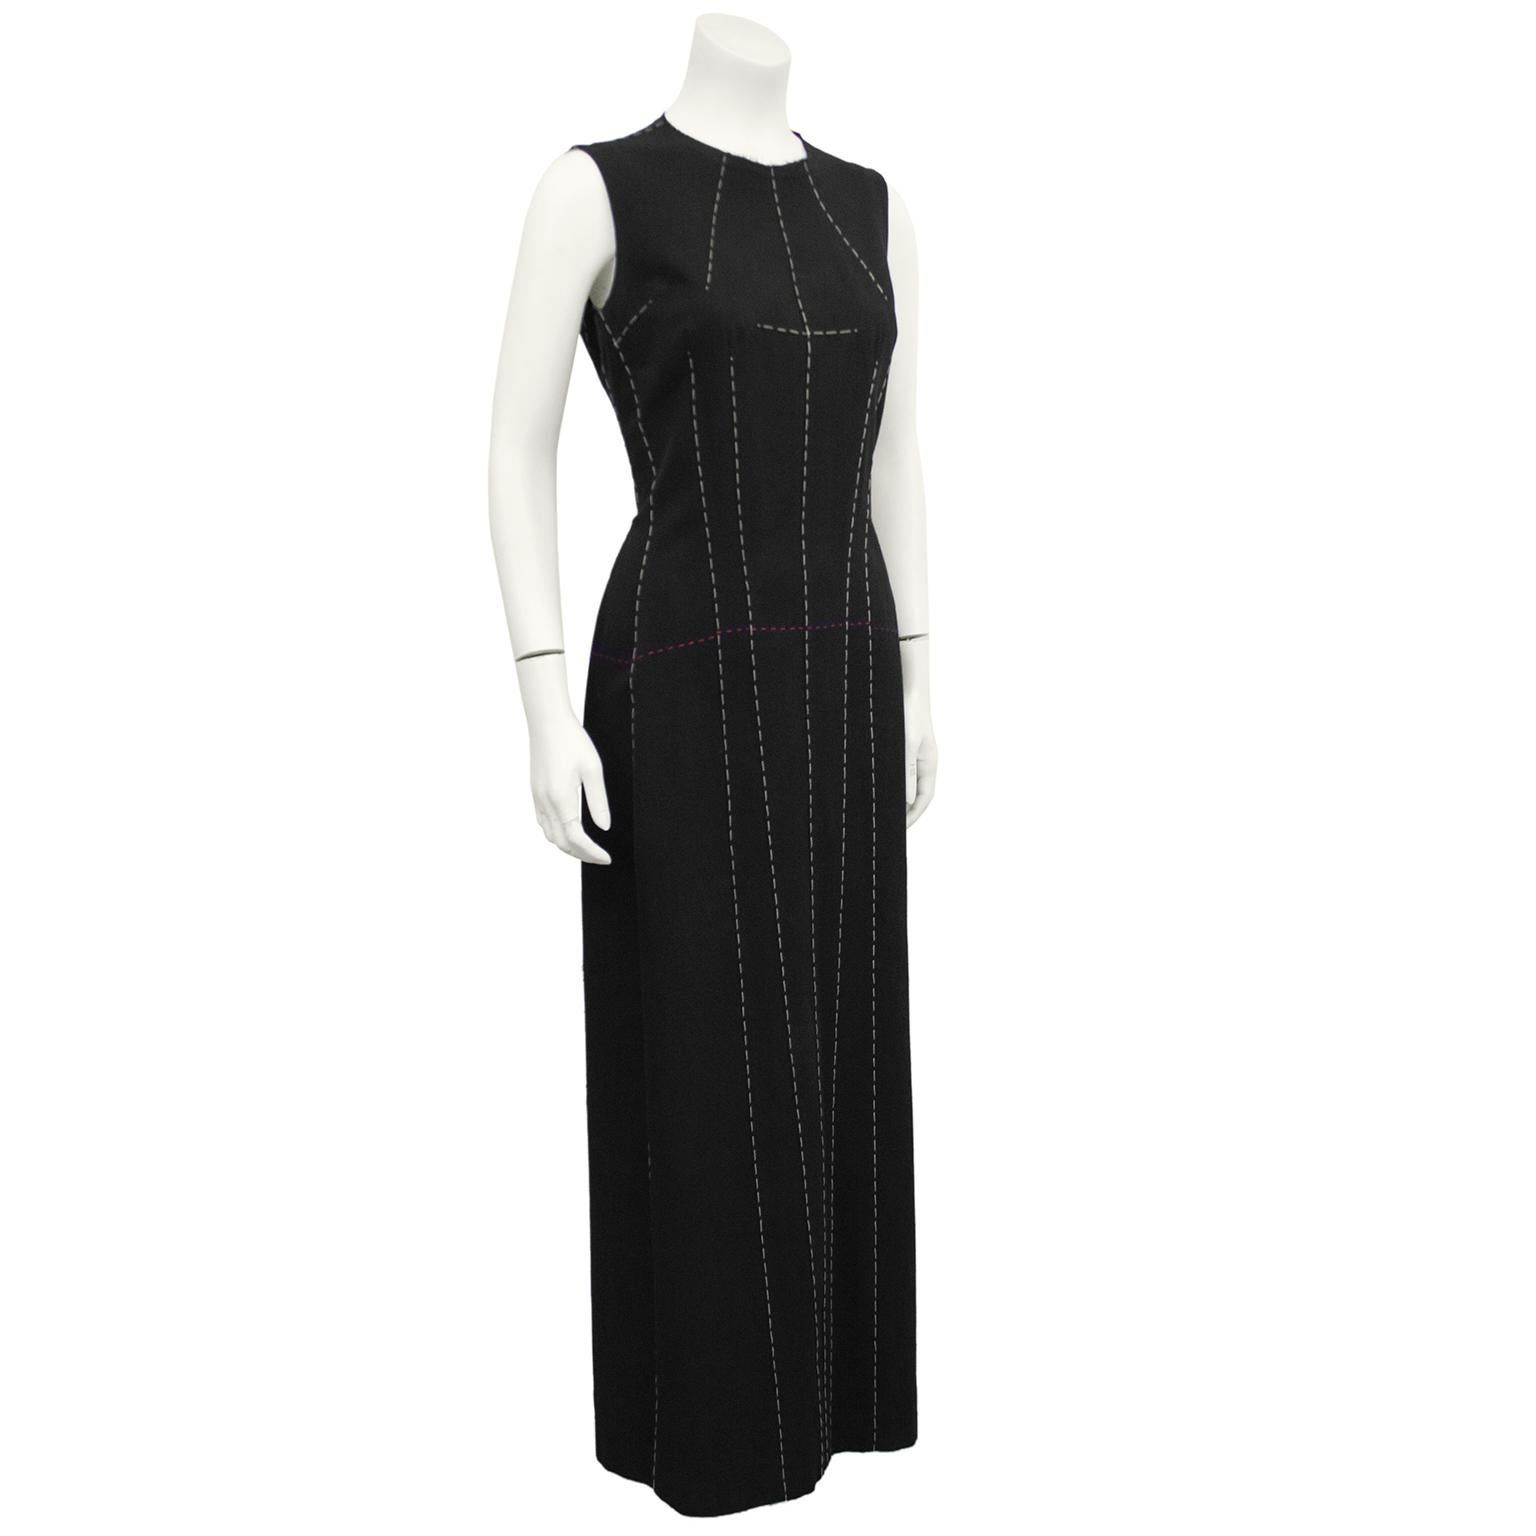 Understated and beautiful deconstructed Yohji Yamamoto sleeveless maxi dress. Black with contrasting white and red top stitching throughout, following the seam lines. Deconstructed style of the top stitching follow where the dress pattern would need